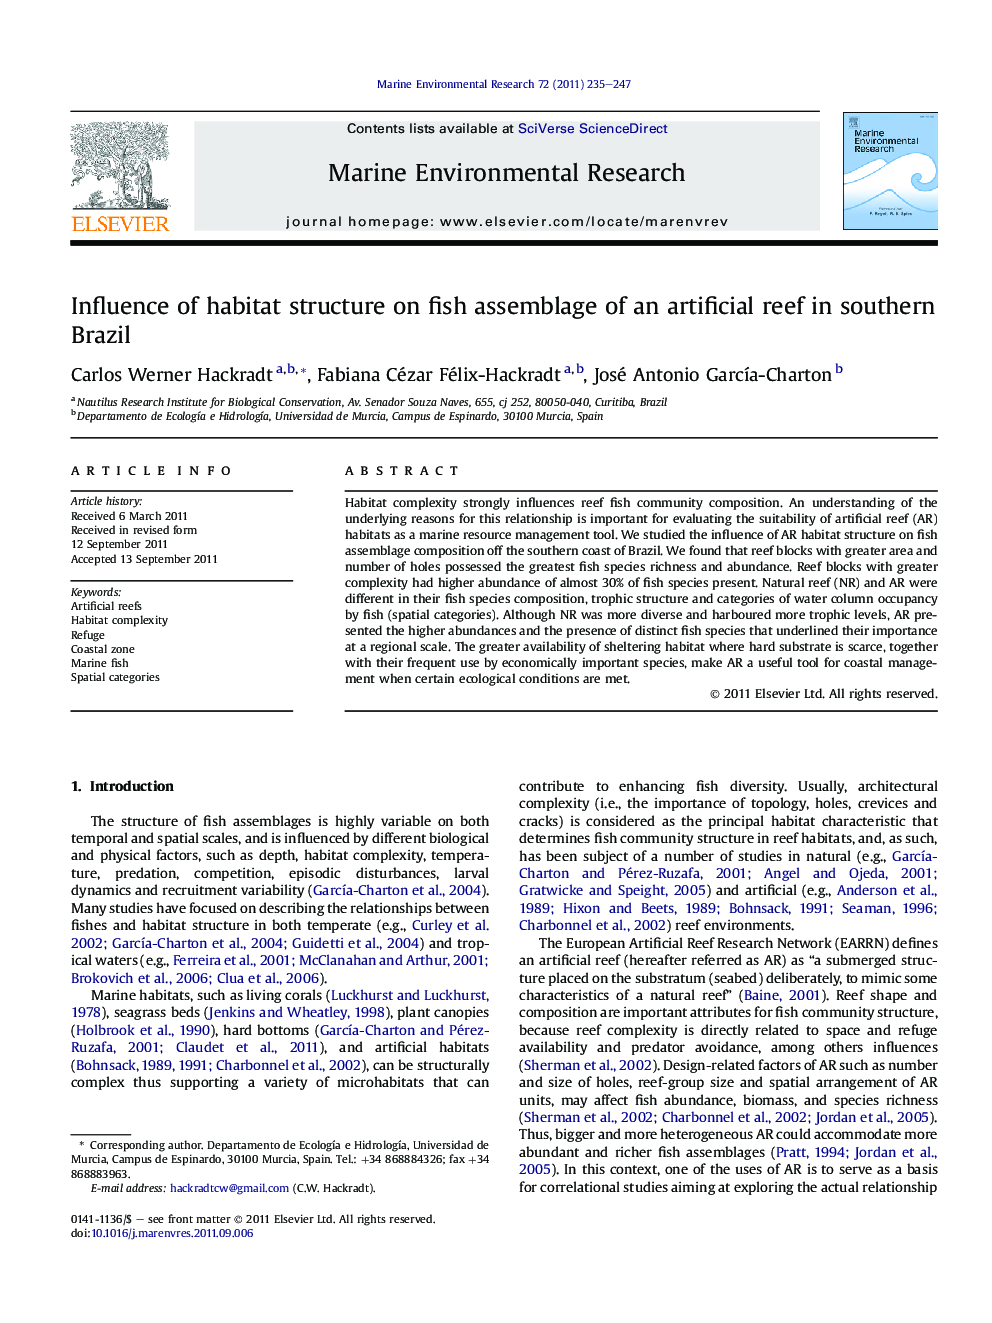 Influence of habitat structure on fish assemblage of an artificial reef in southern Brazil